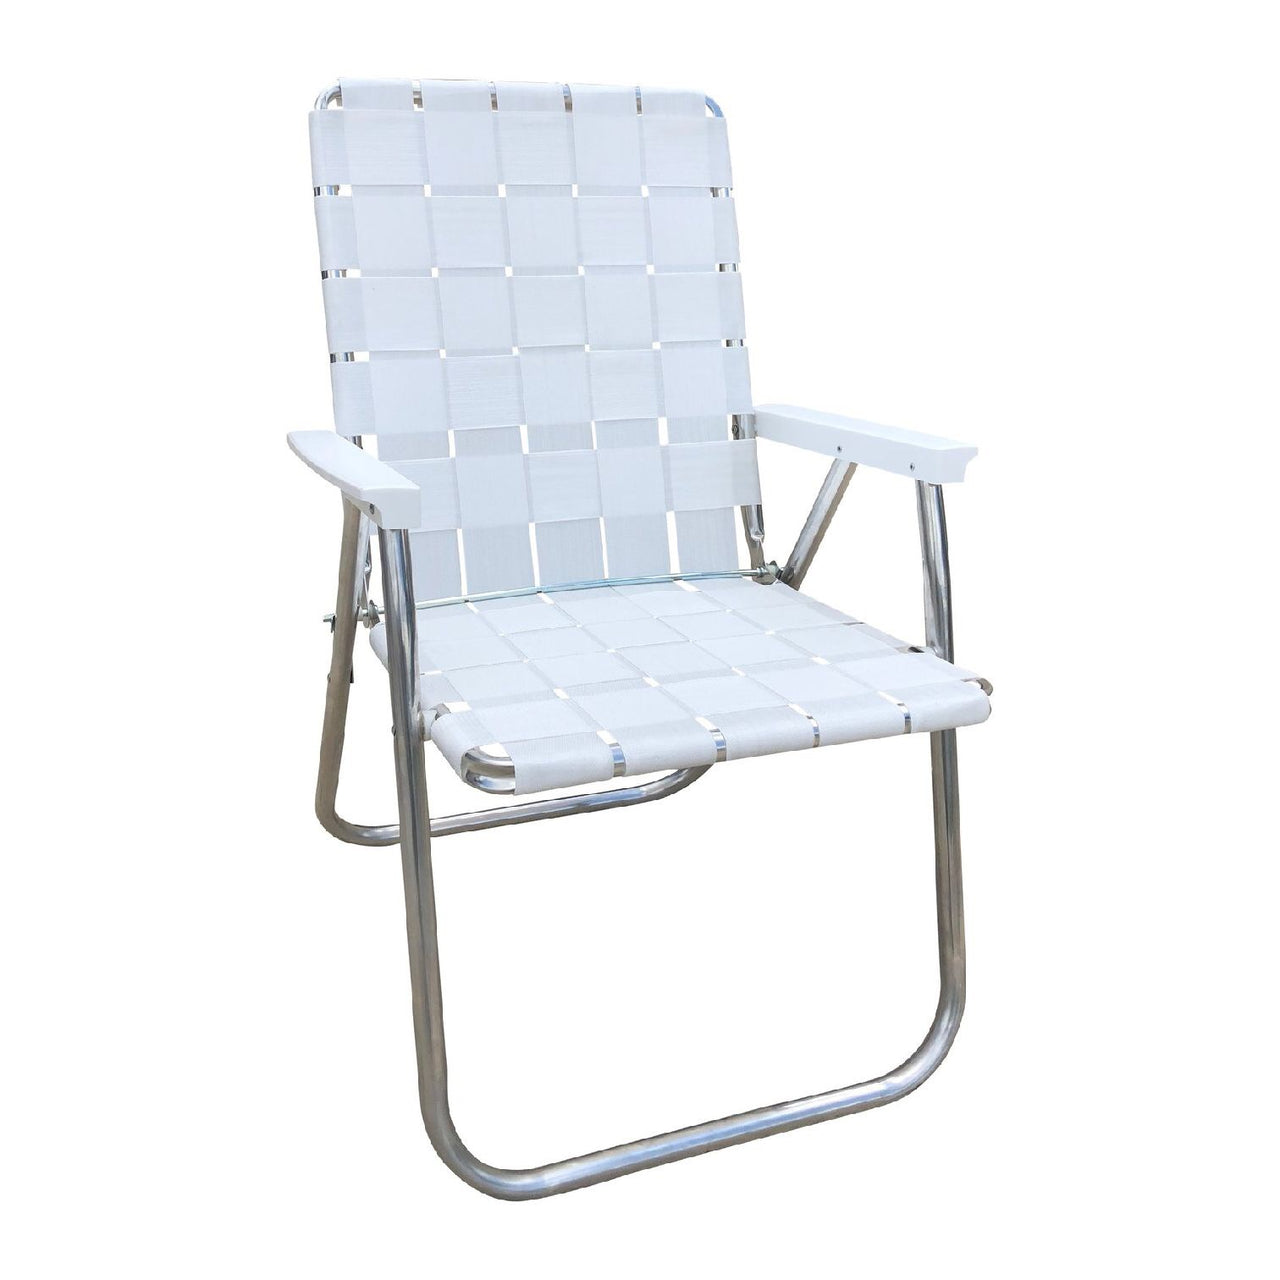 Lawn Chair | Deluxe White